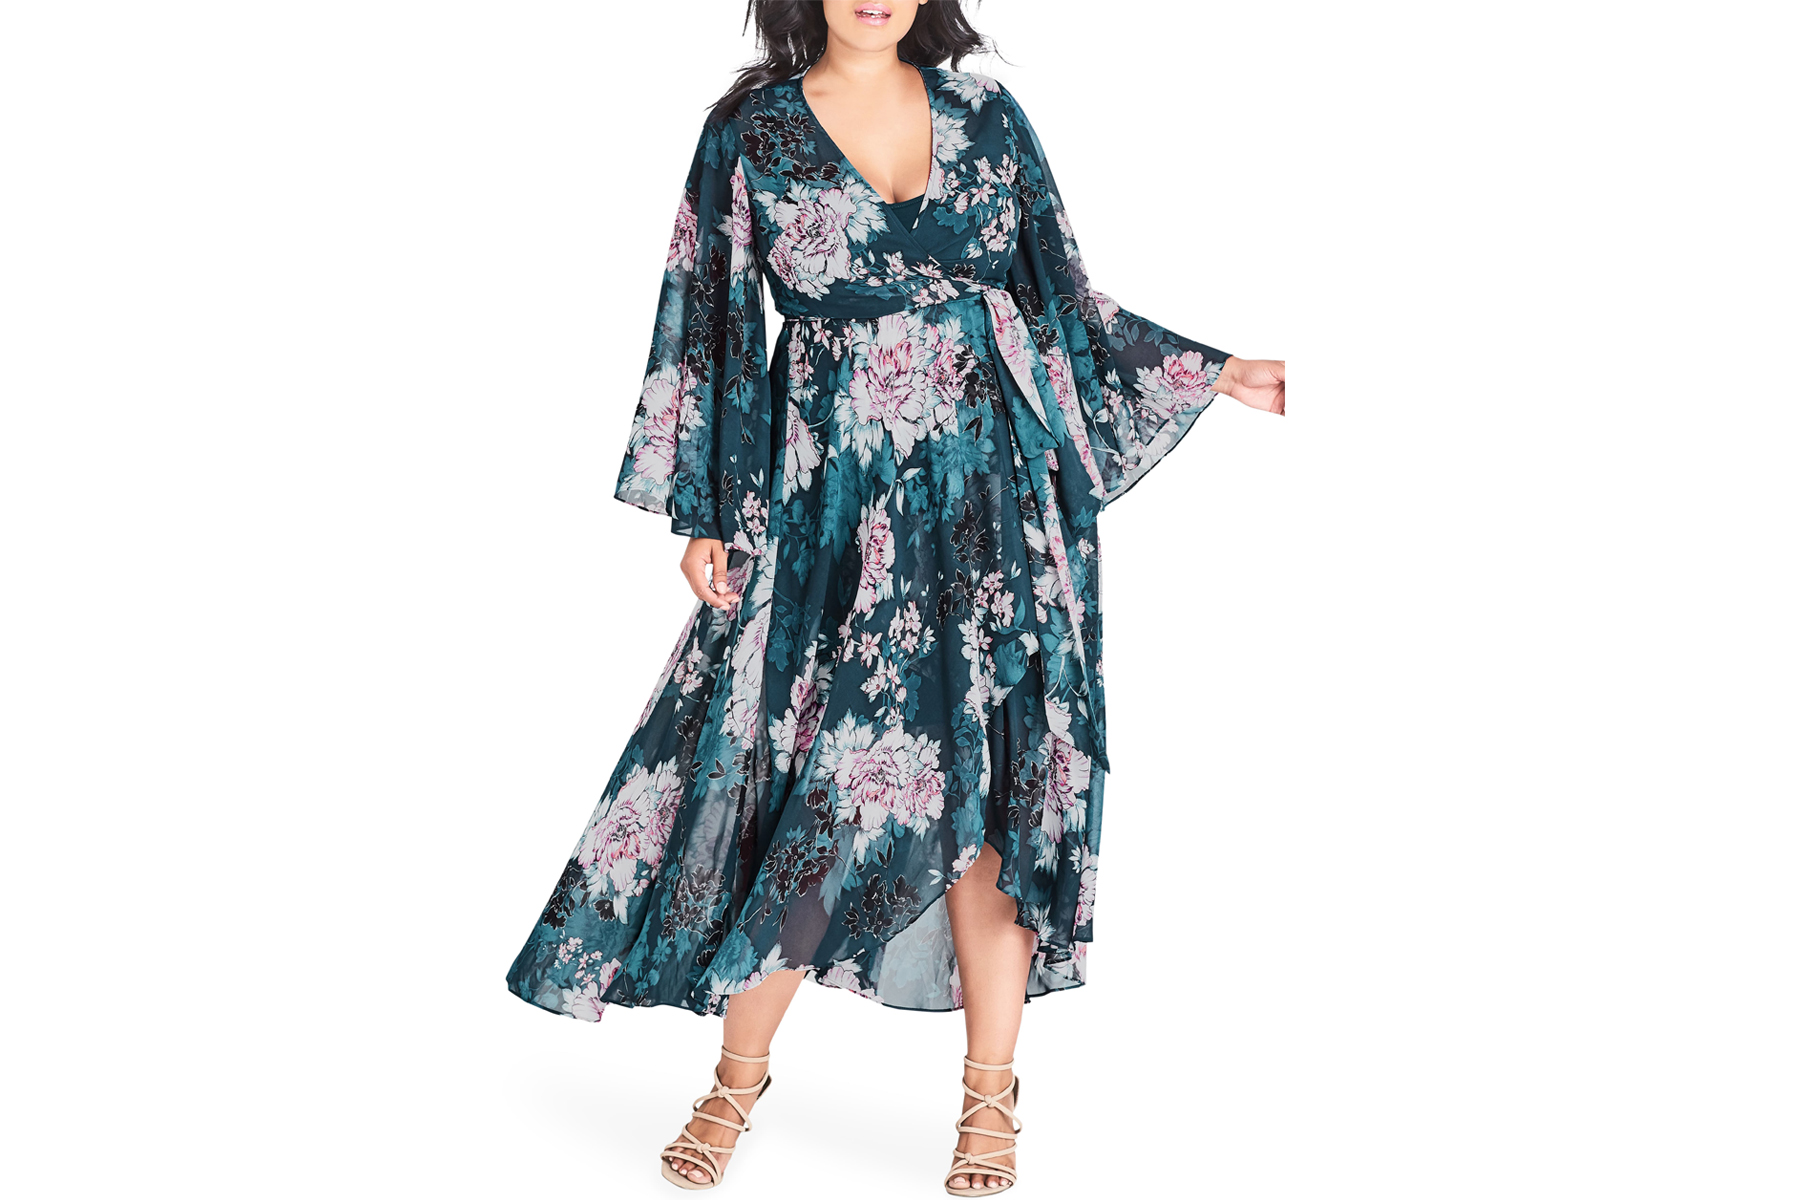 plus size cocktail dresses for over 50